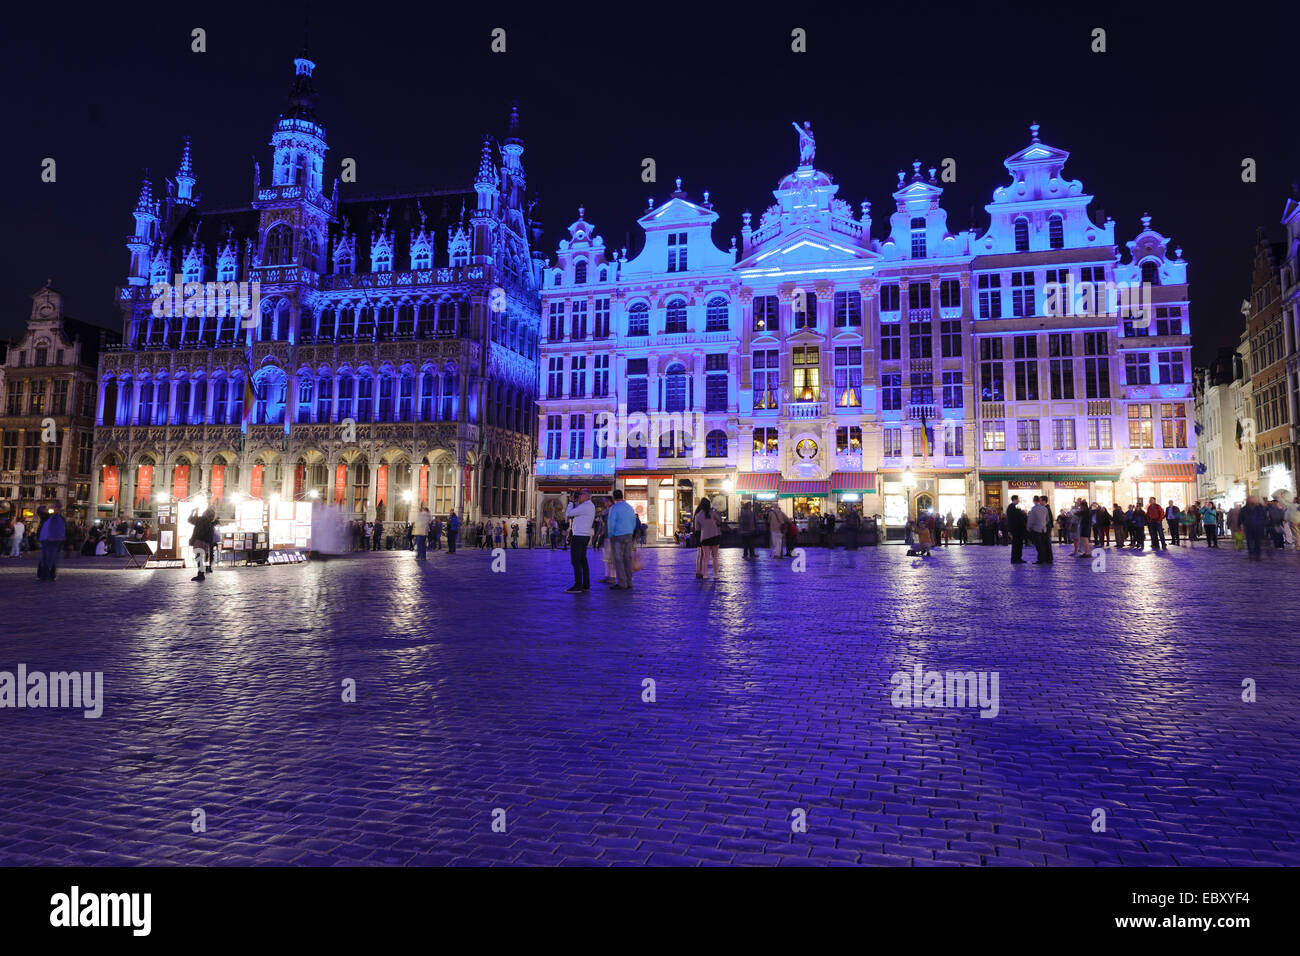 Royal House or Maison du Roi and Chaloupe d'Or, Grote Markt, Grand Place market square, illuminated at night, Brussels Stock Photo